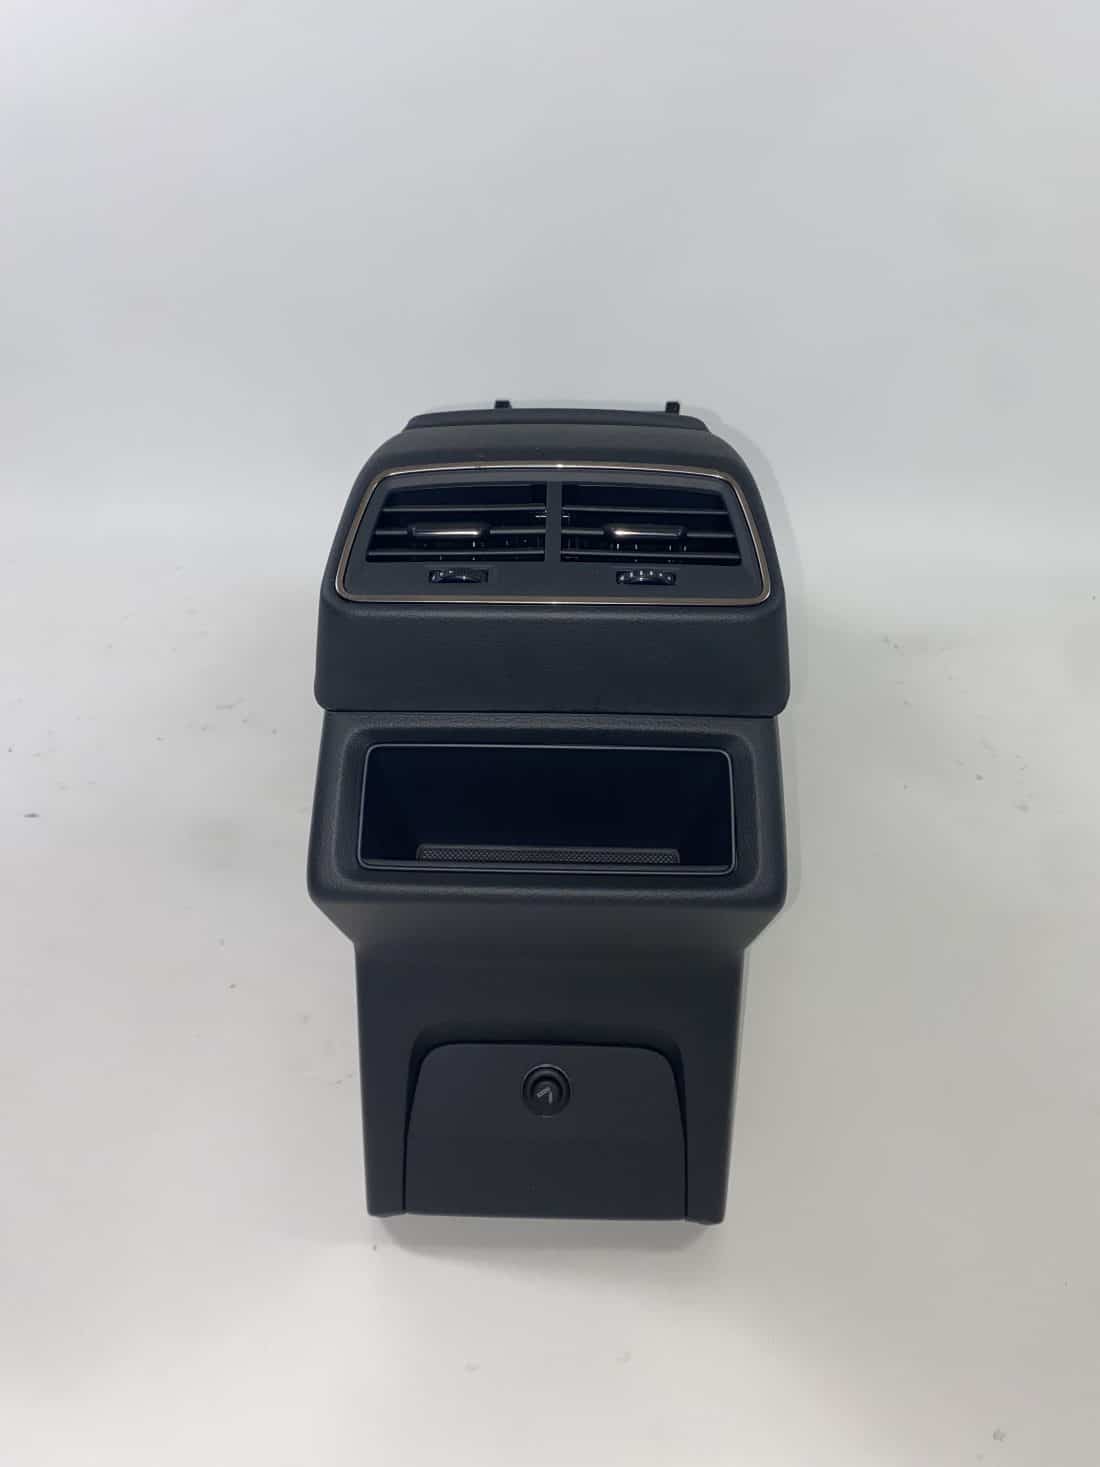 Trp Post Container Data Trp Post Id 11982 Interior Audi E Tron Leather Black 2020 Trp Post Container